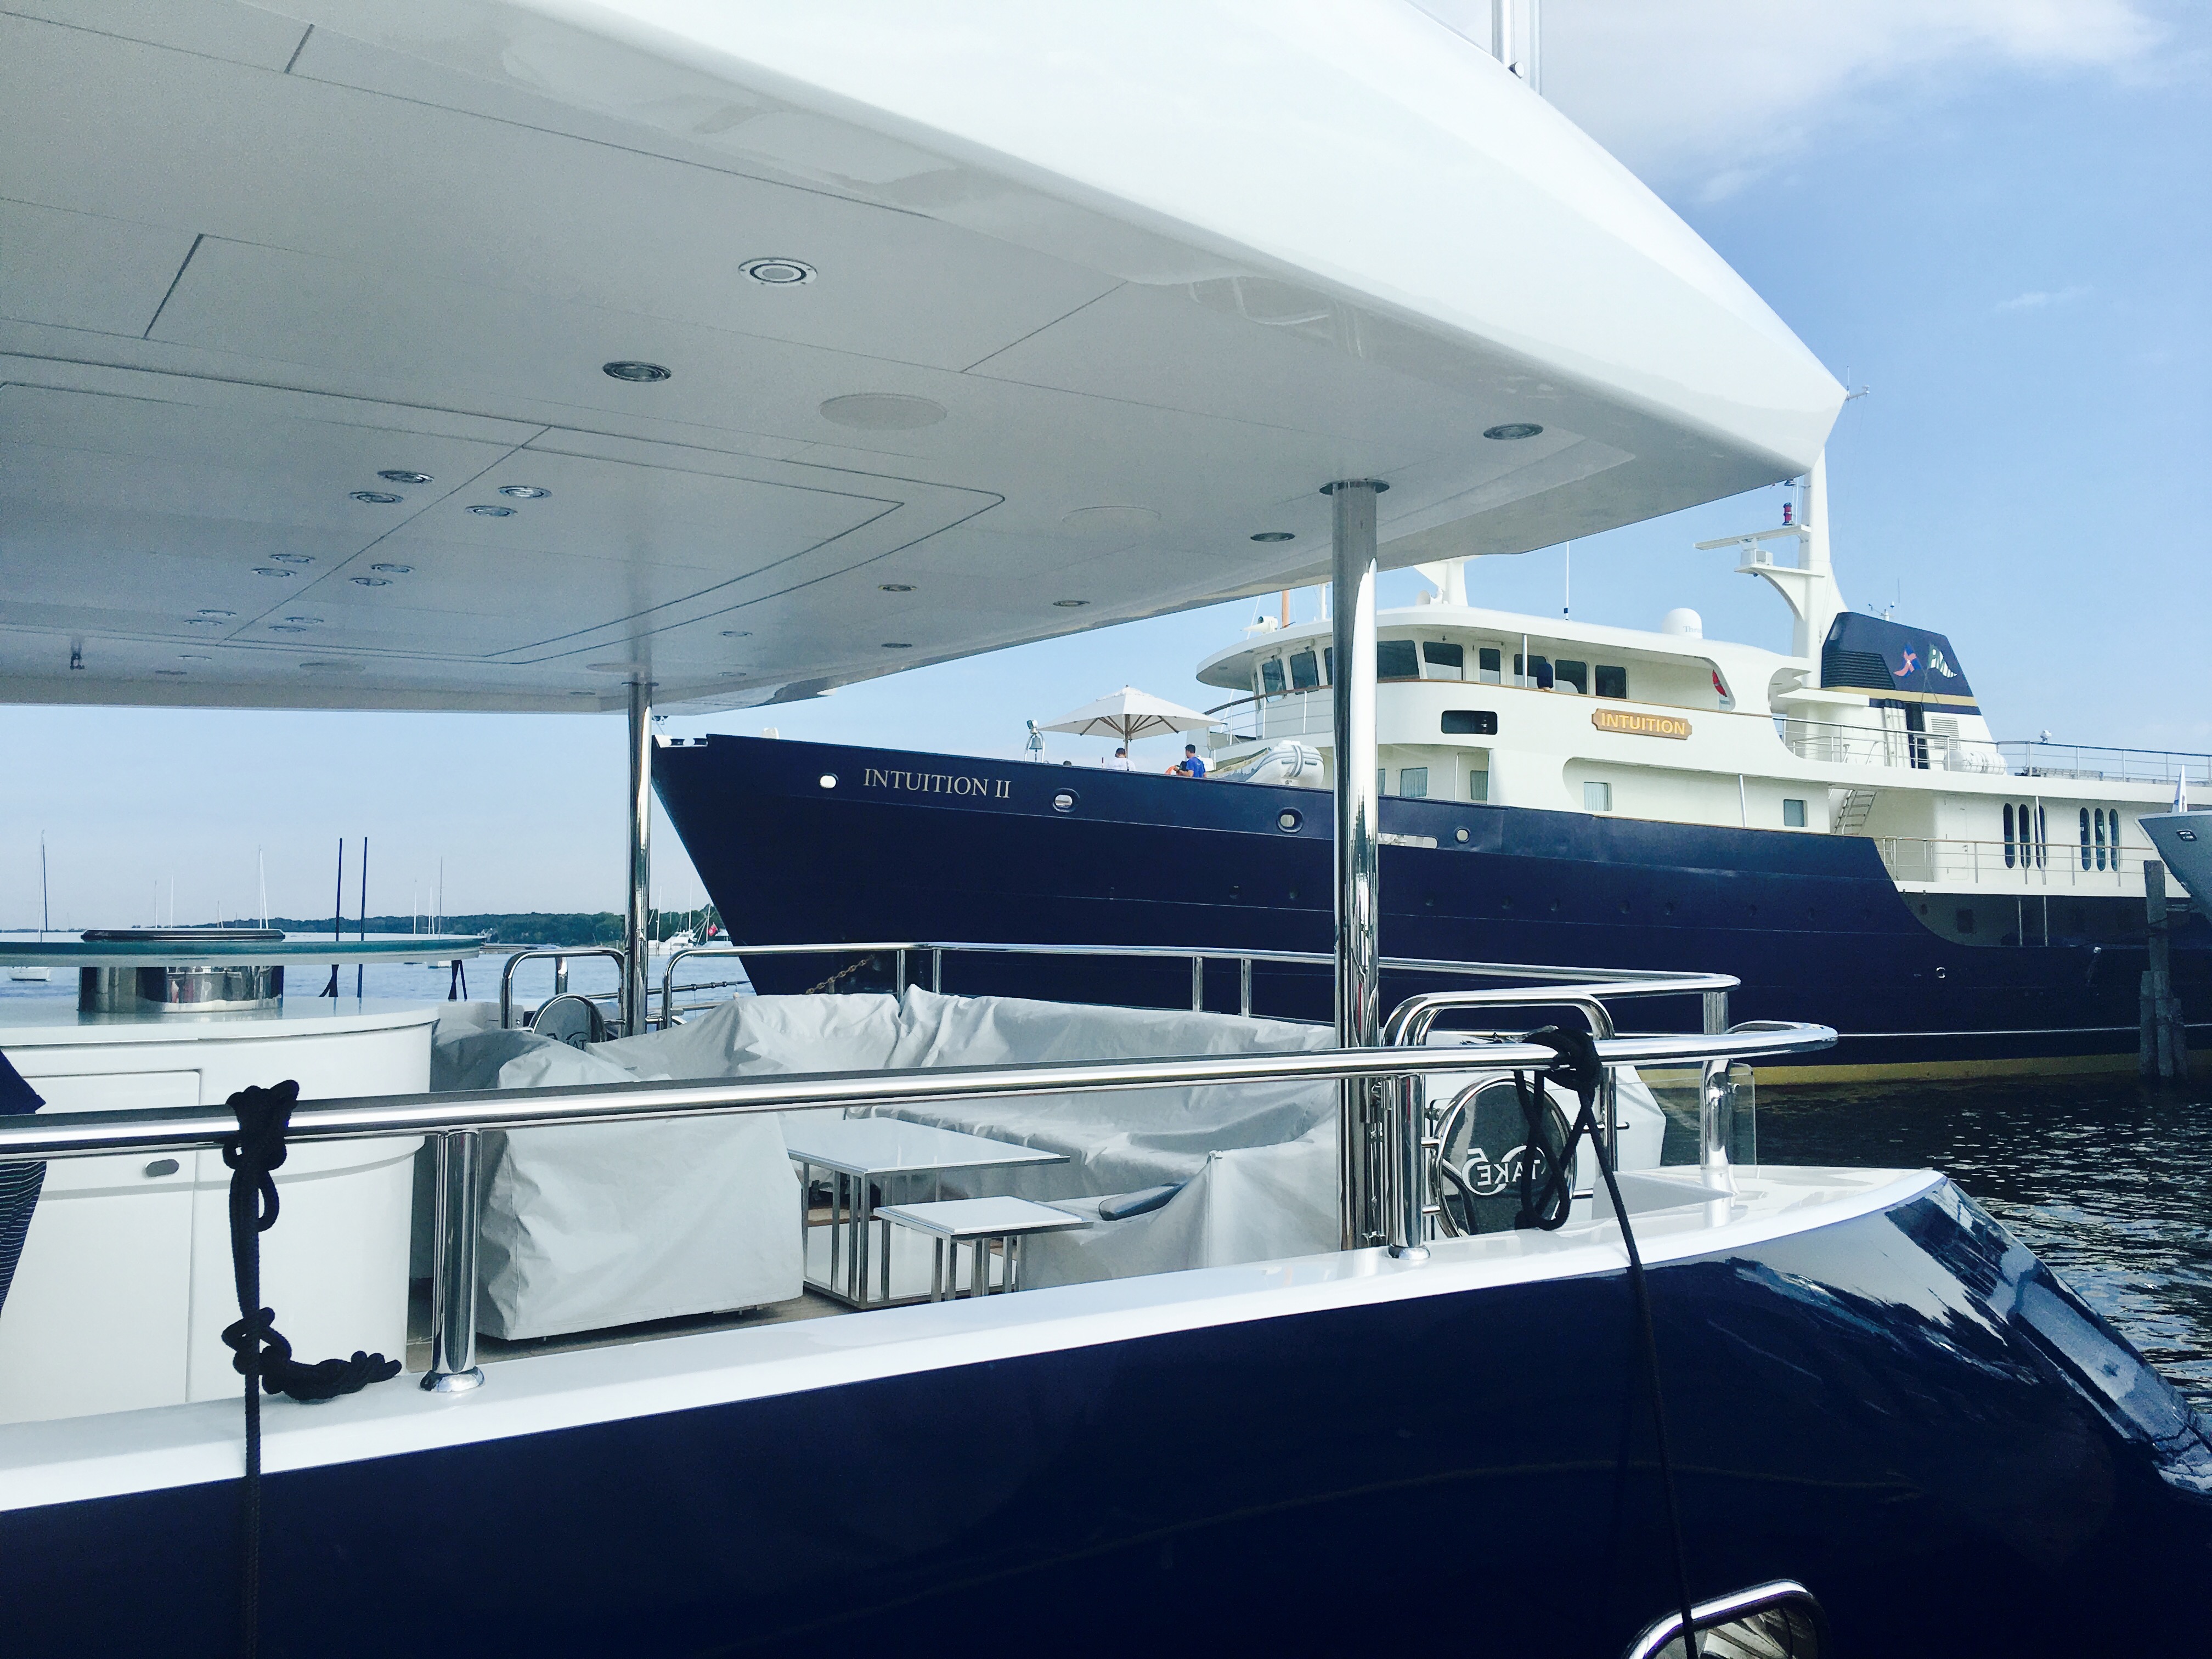 My Intuition II seen through the deck of Motor Yacht, Take 5 in Sag Harbor.